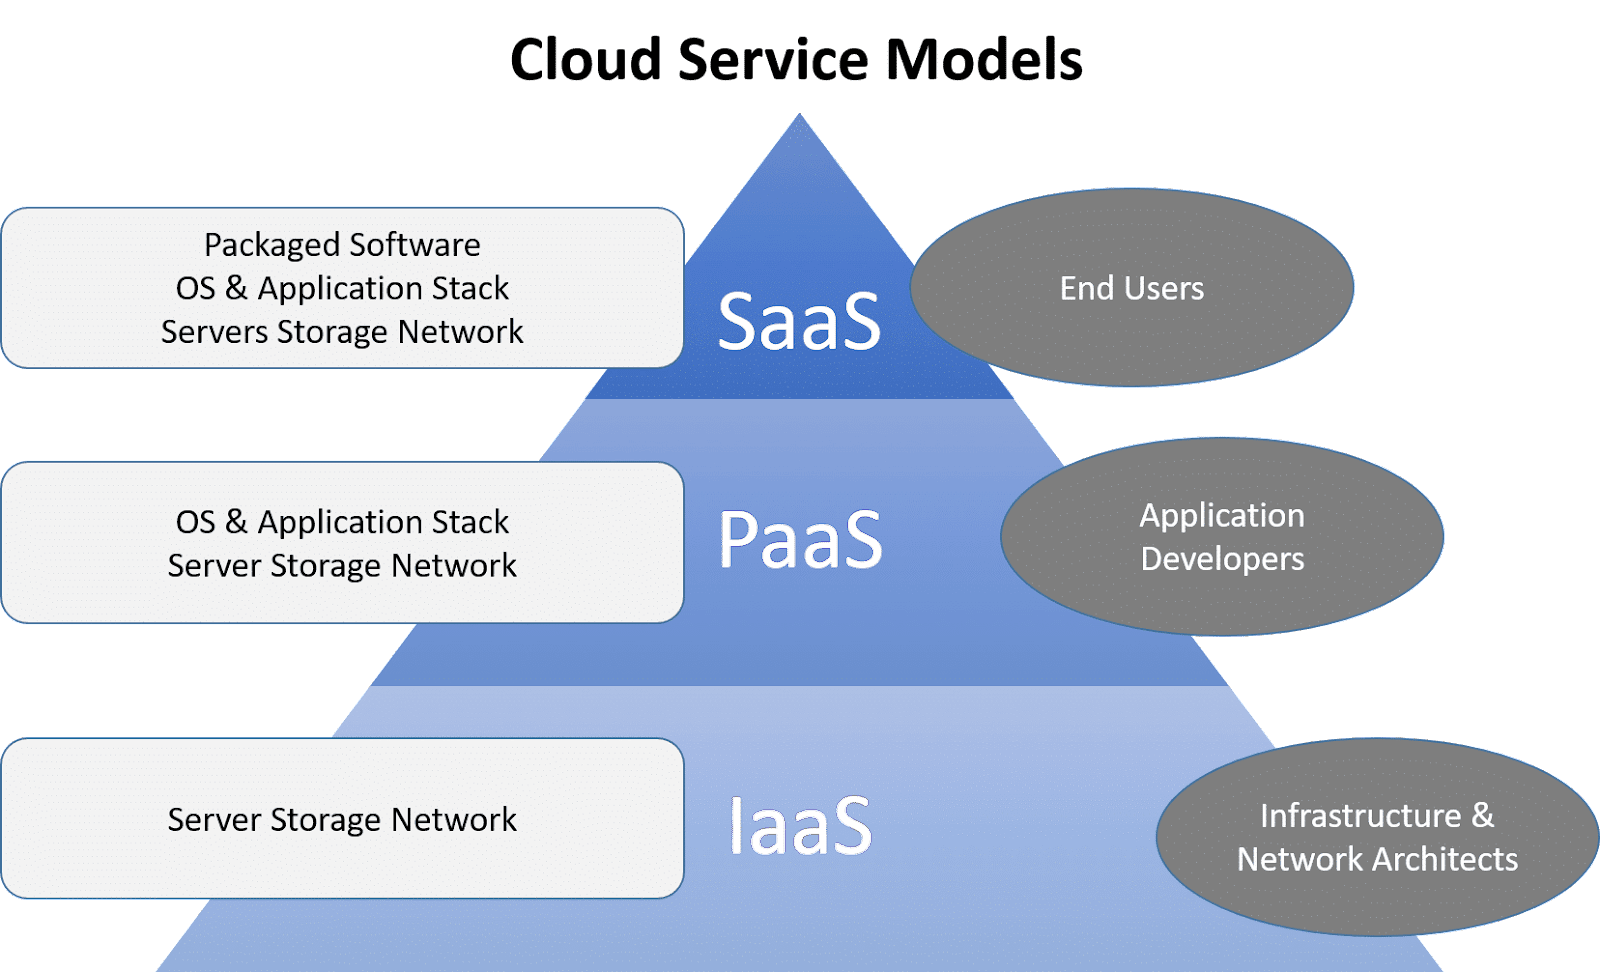 C:\Users\FAIRUZ\Documents\LEXIS\Articles\Image 79. Factors or Considerations for Choosing a Cloud Service Model\Image 1.png